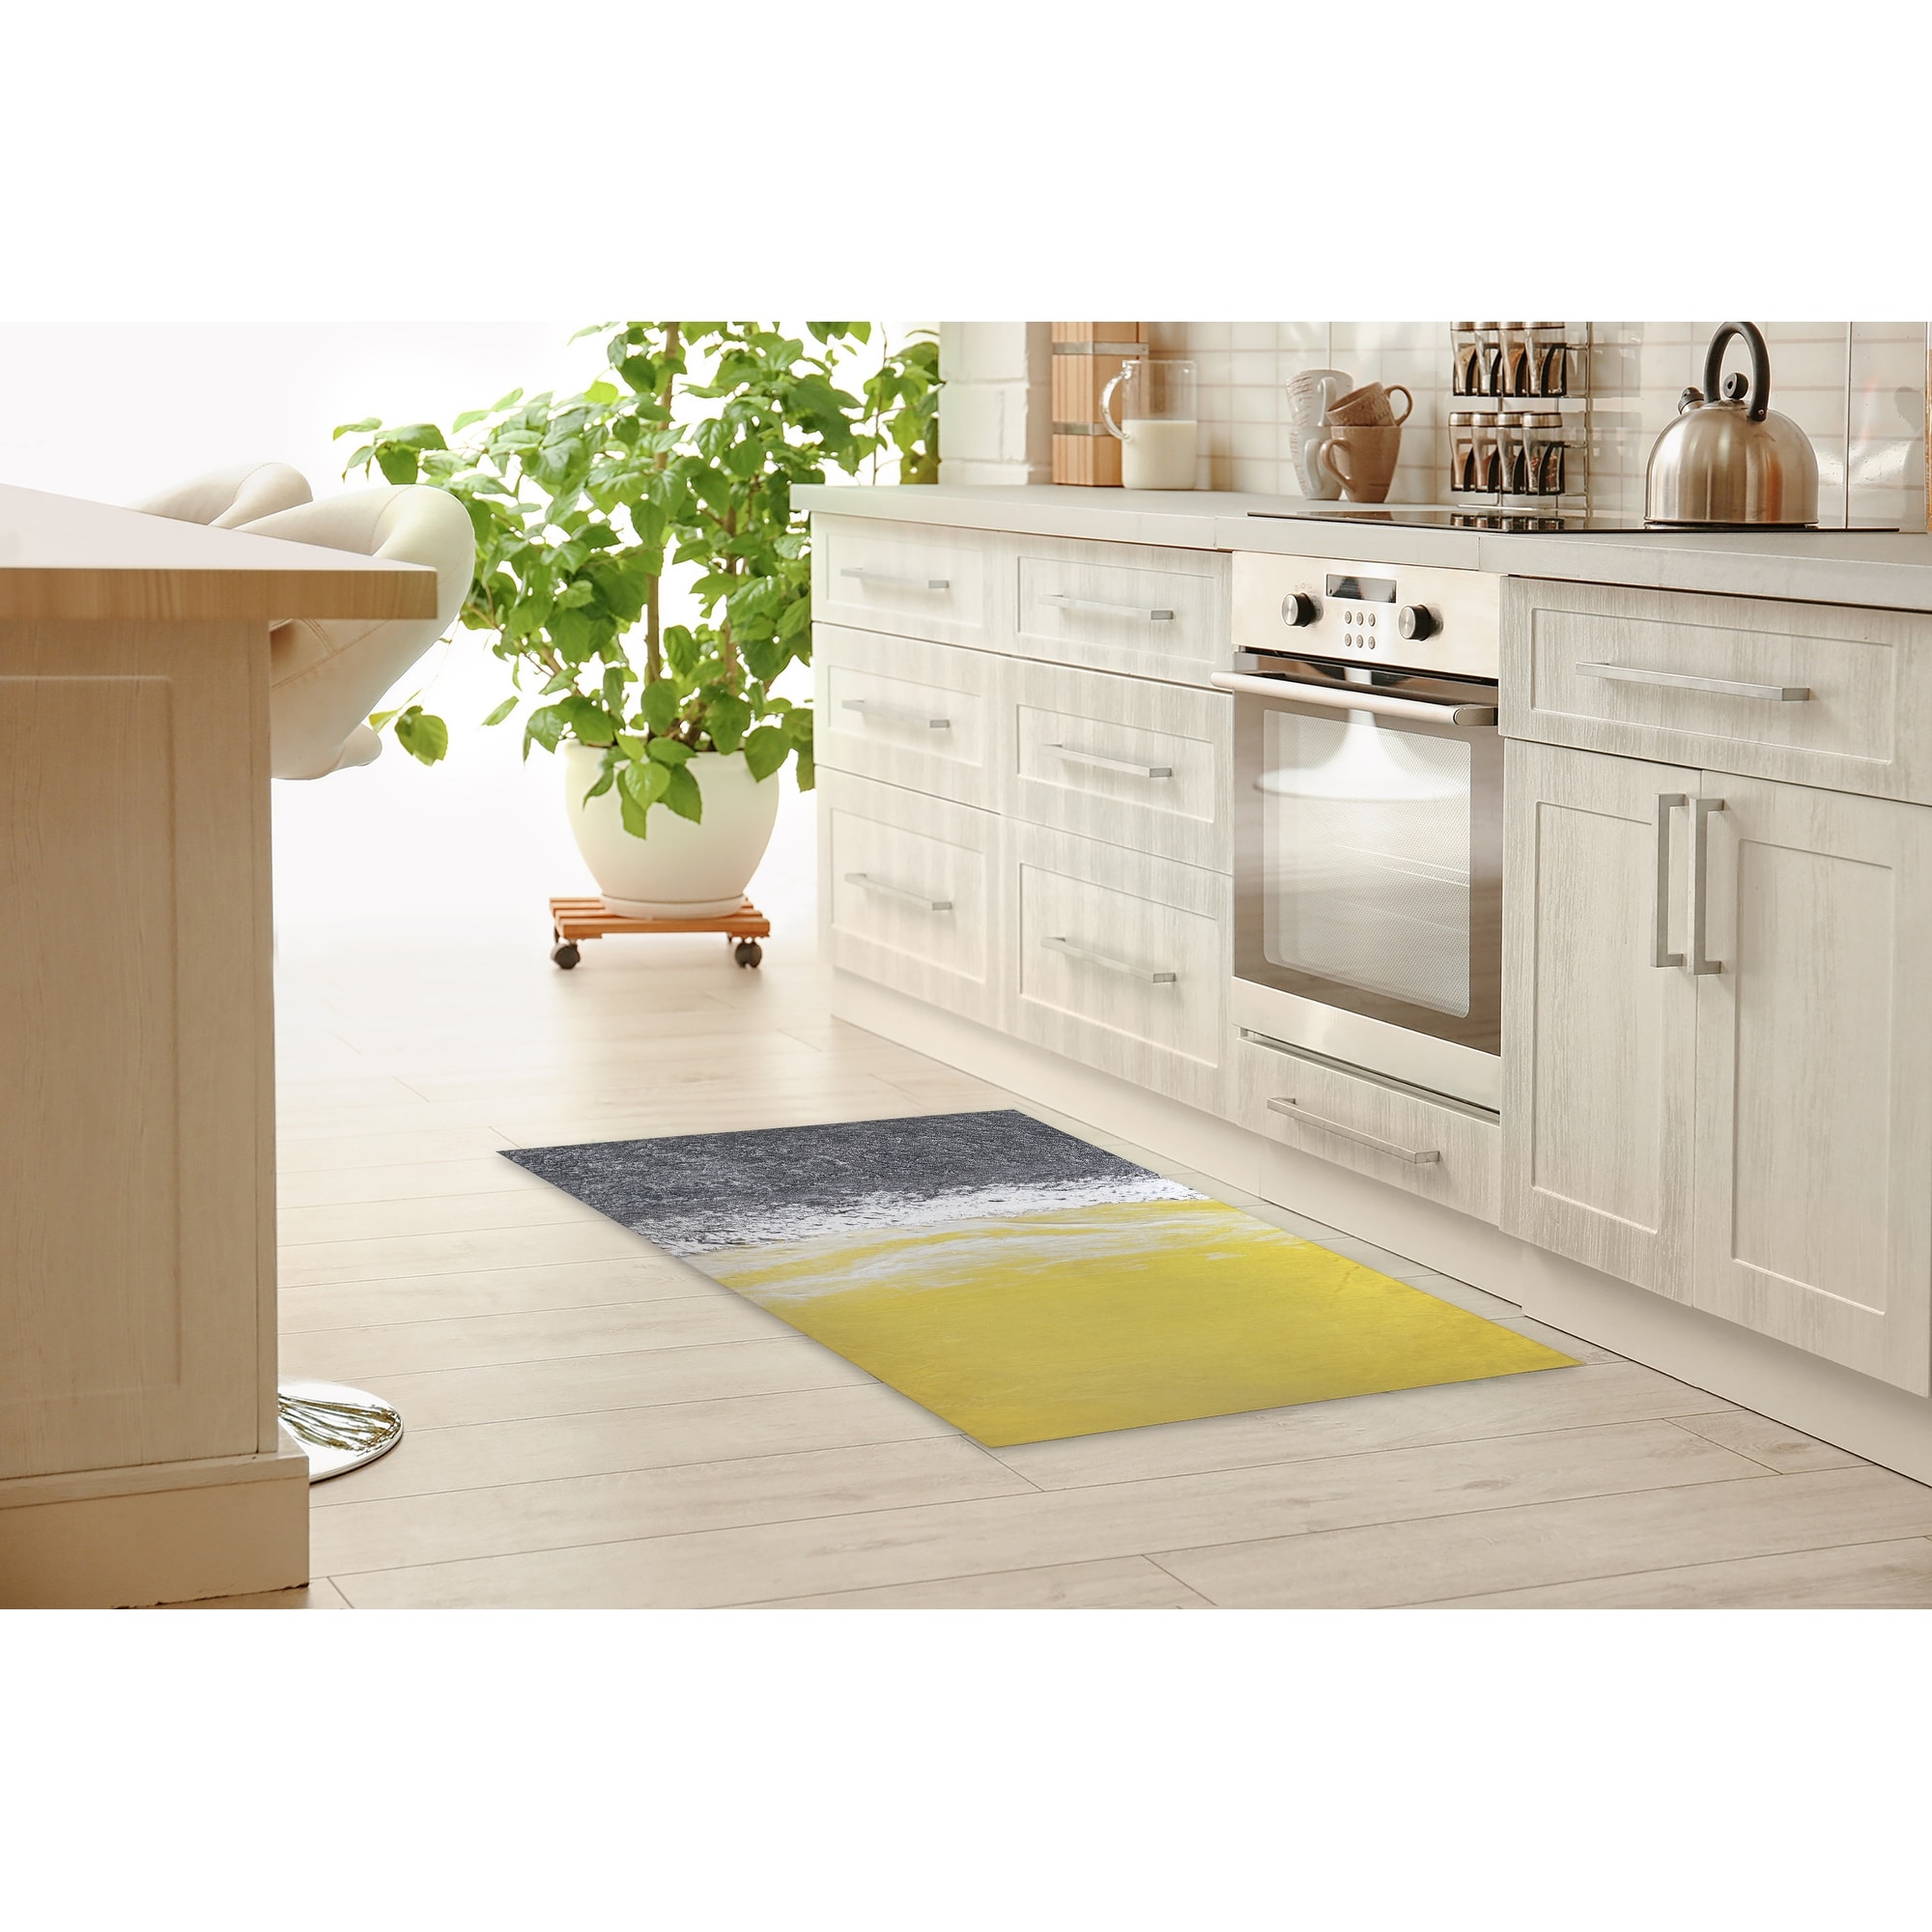 PENA PALACE Kitchen Mat By McCrink Overstock -